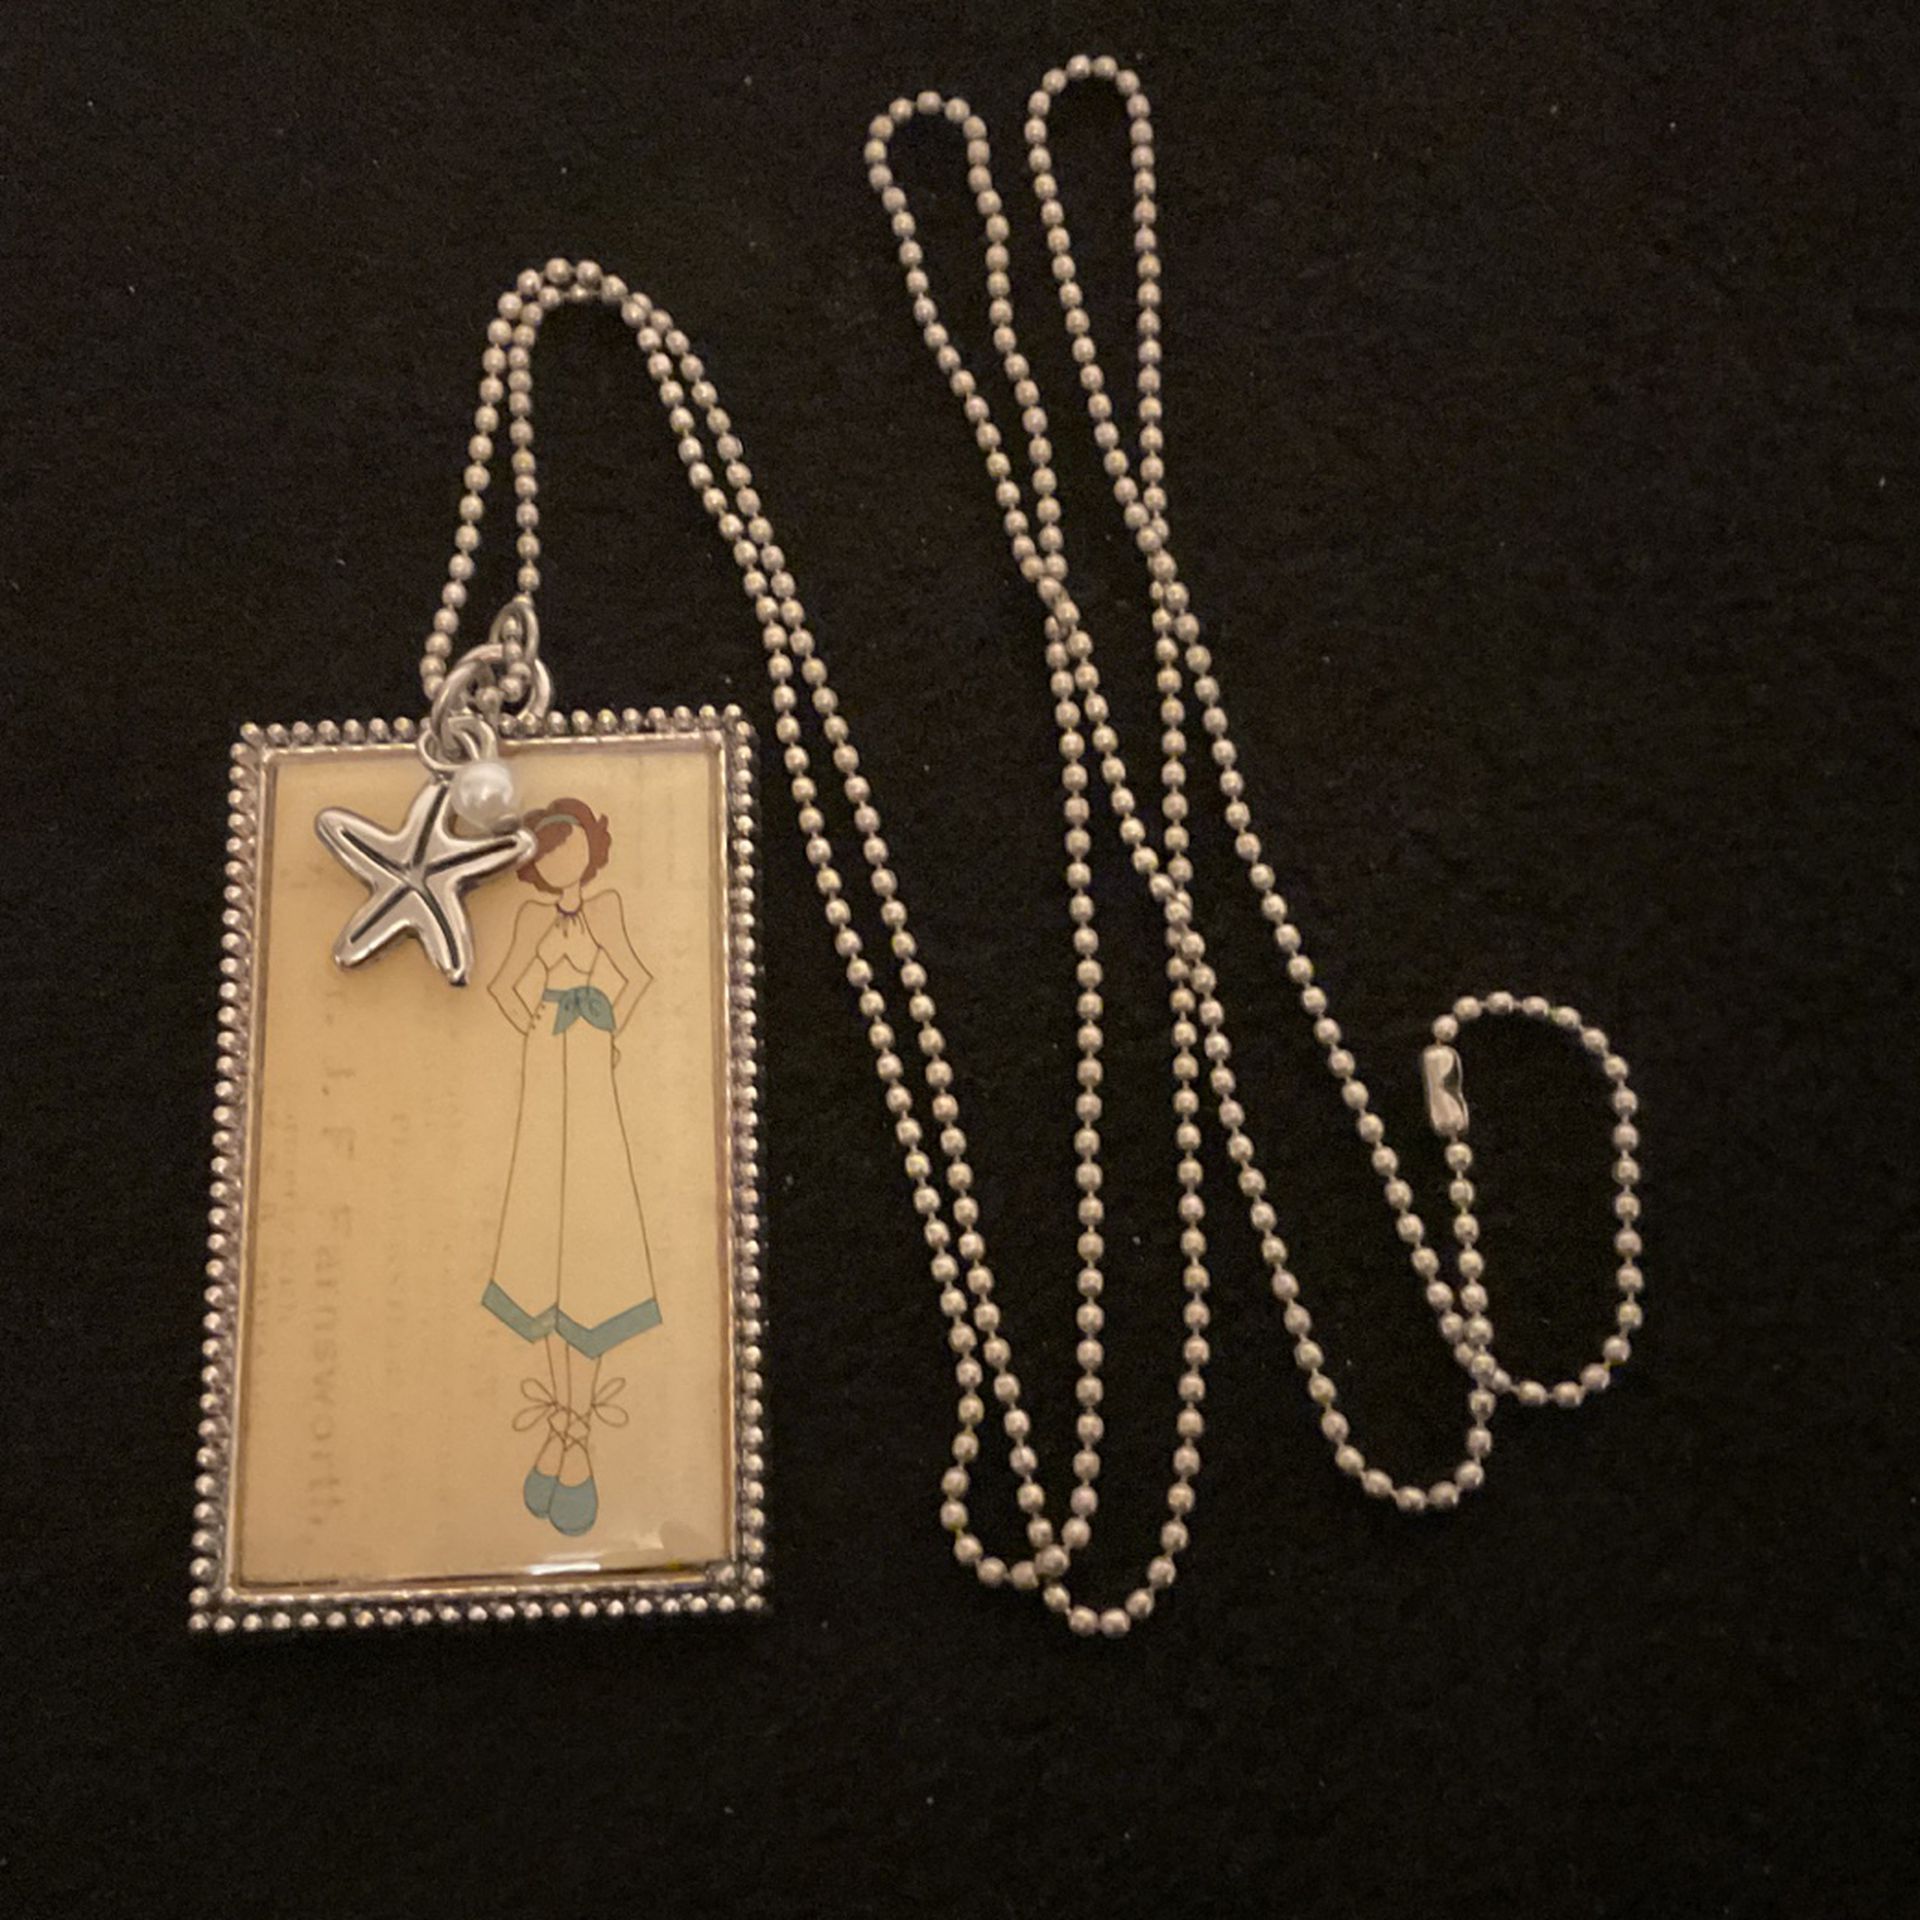 30” SilverTone Dog chain Necklace With Dog Tag Pendant And 2 Charms